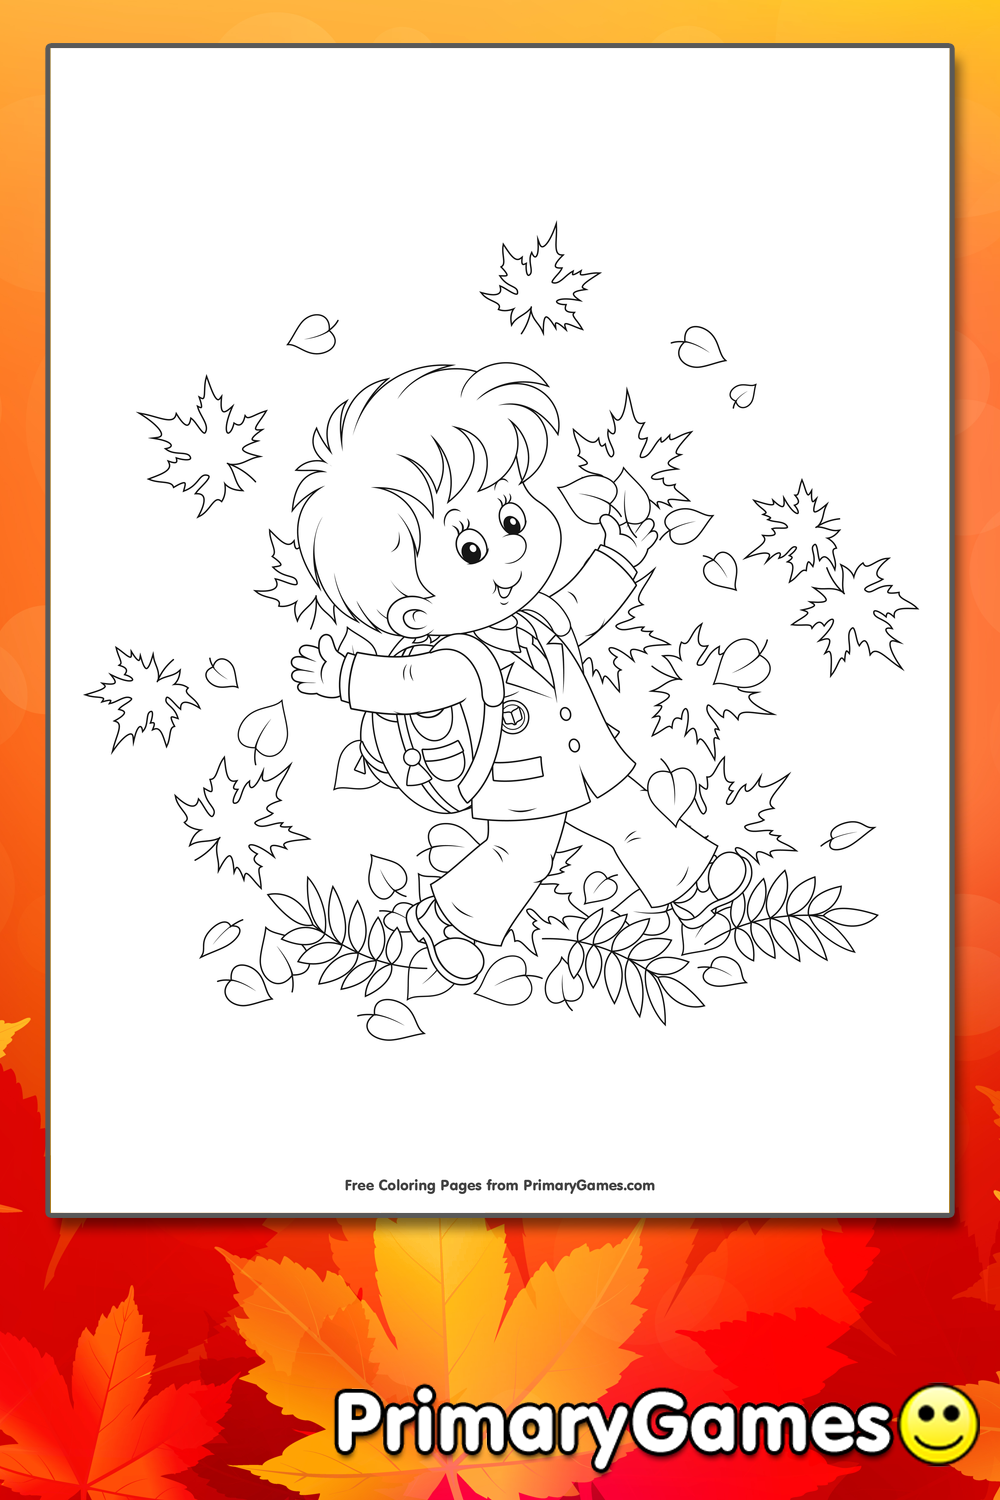 https://www.primarygames.com/seasons/fall/coloringpages/pdf/pins/17-boy-with-leaves.png